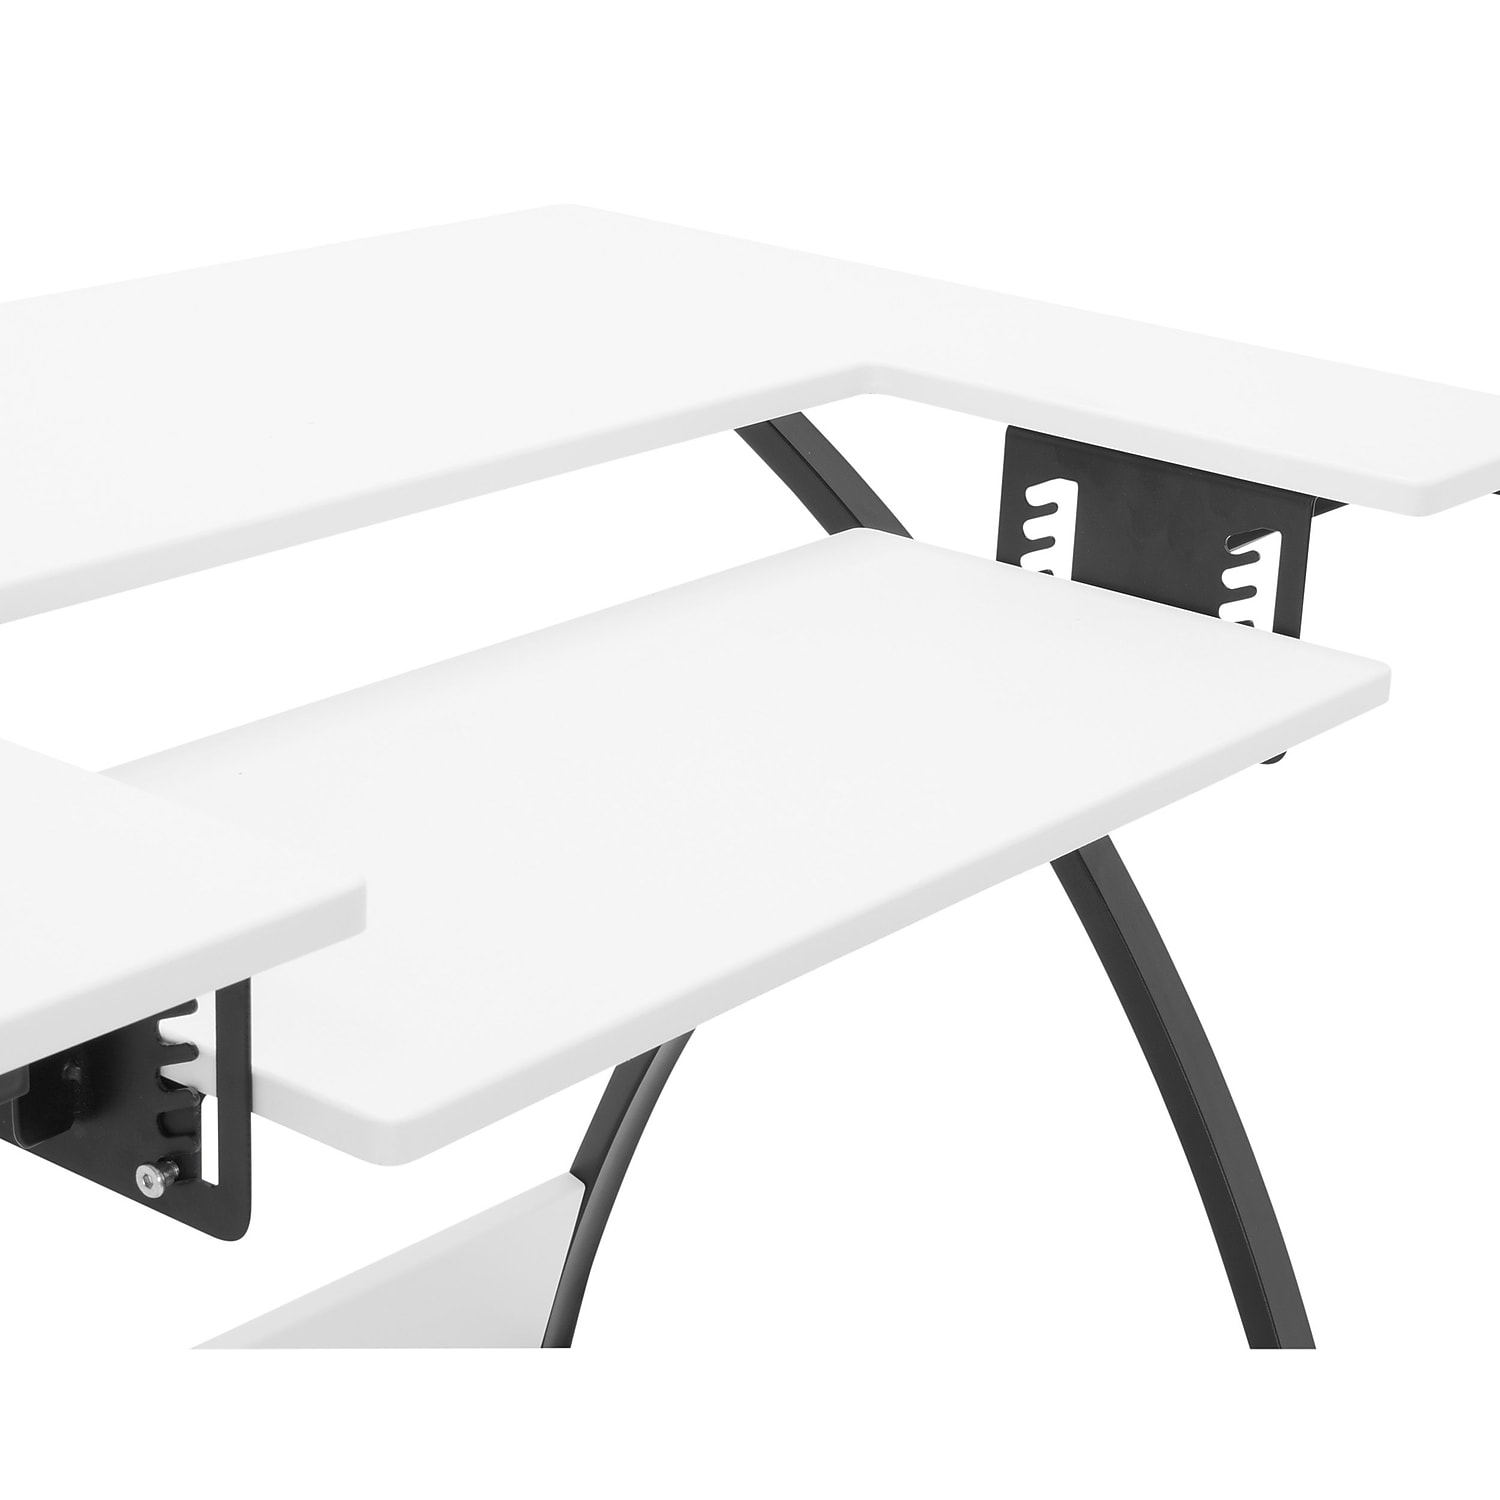 Sew Ready 13332 Comet Modern Sewing Table in Black / White - image 3 of 7